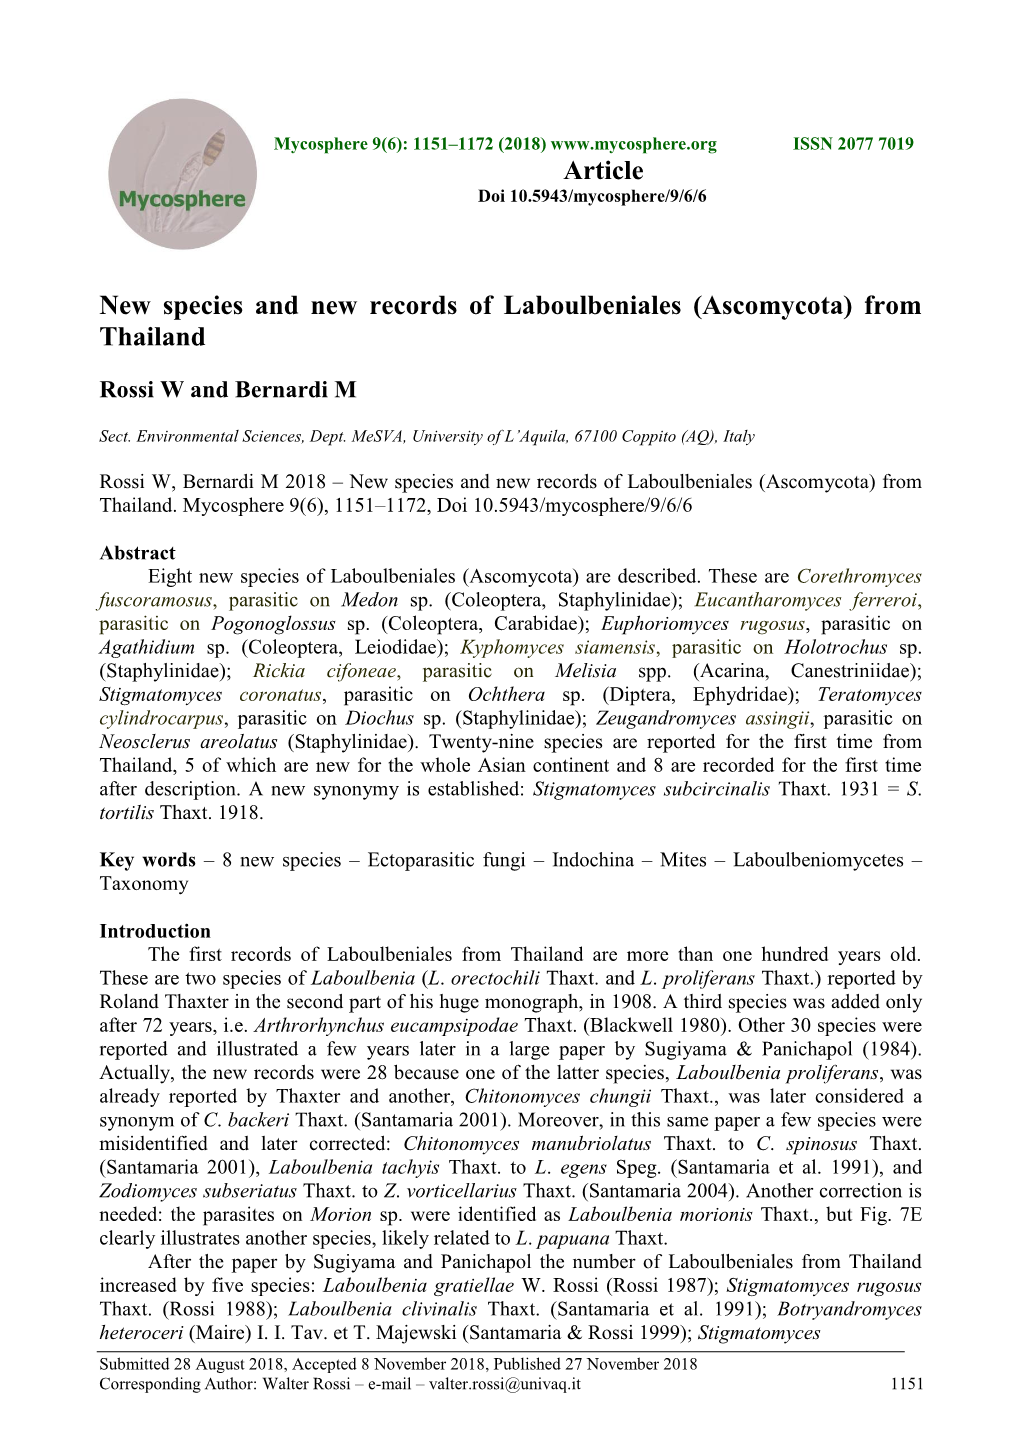 New Species and New Records of Laboulbeniales (Ascomycota) from Thailand